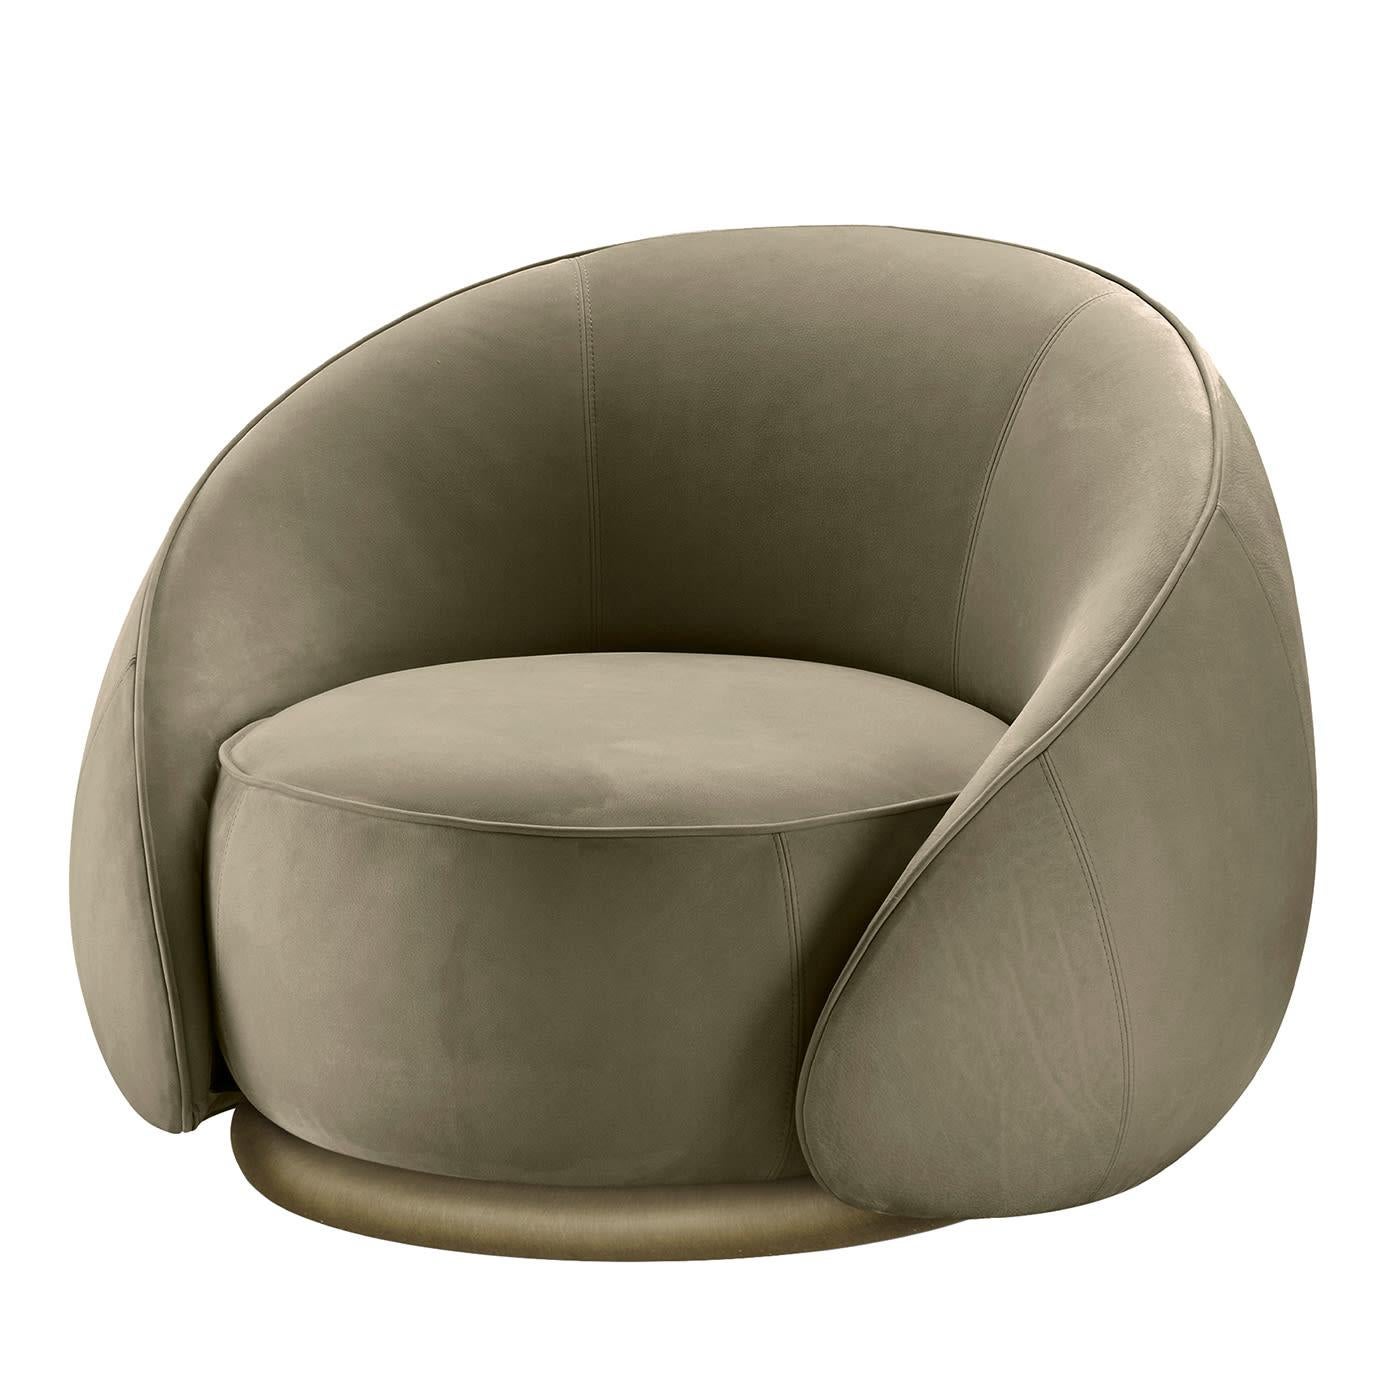 Named after the Italian for hugs, this remarkable armchair is a synthesis of impeccable comfort and a captivating aesthetic. Plump volumes generously stuffed and covered in green-hued leather guarantee an unforgettable seating experience, which will